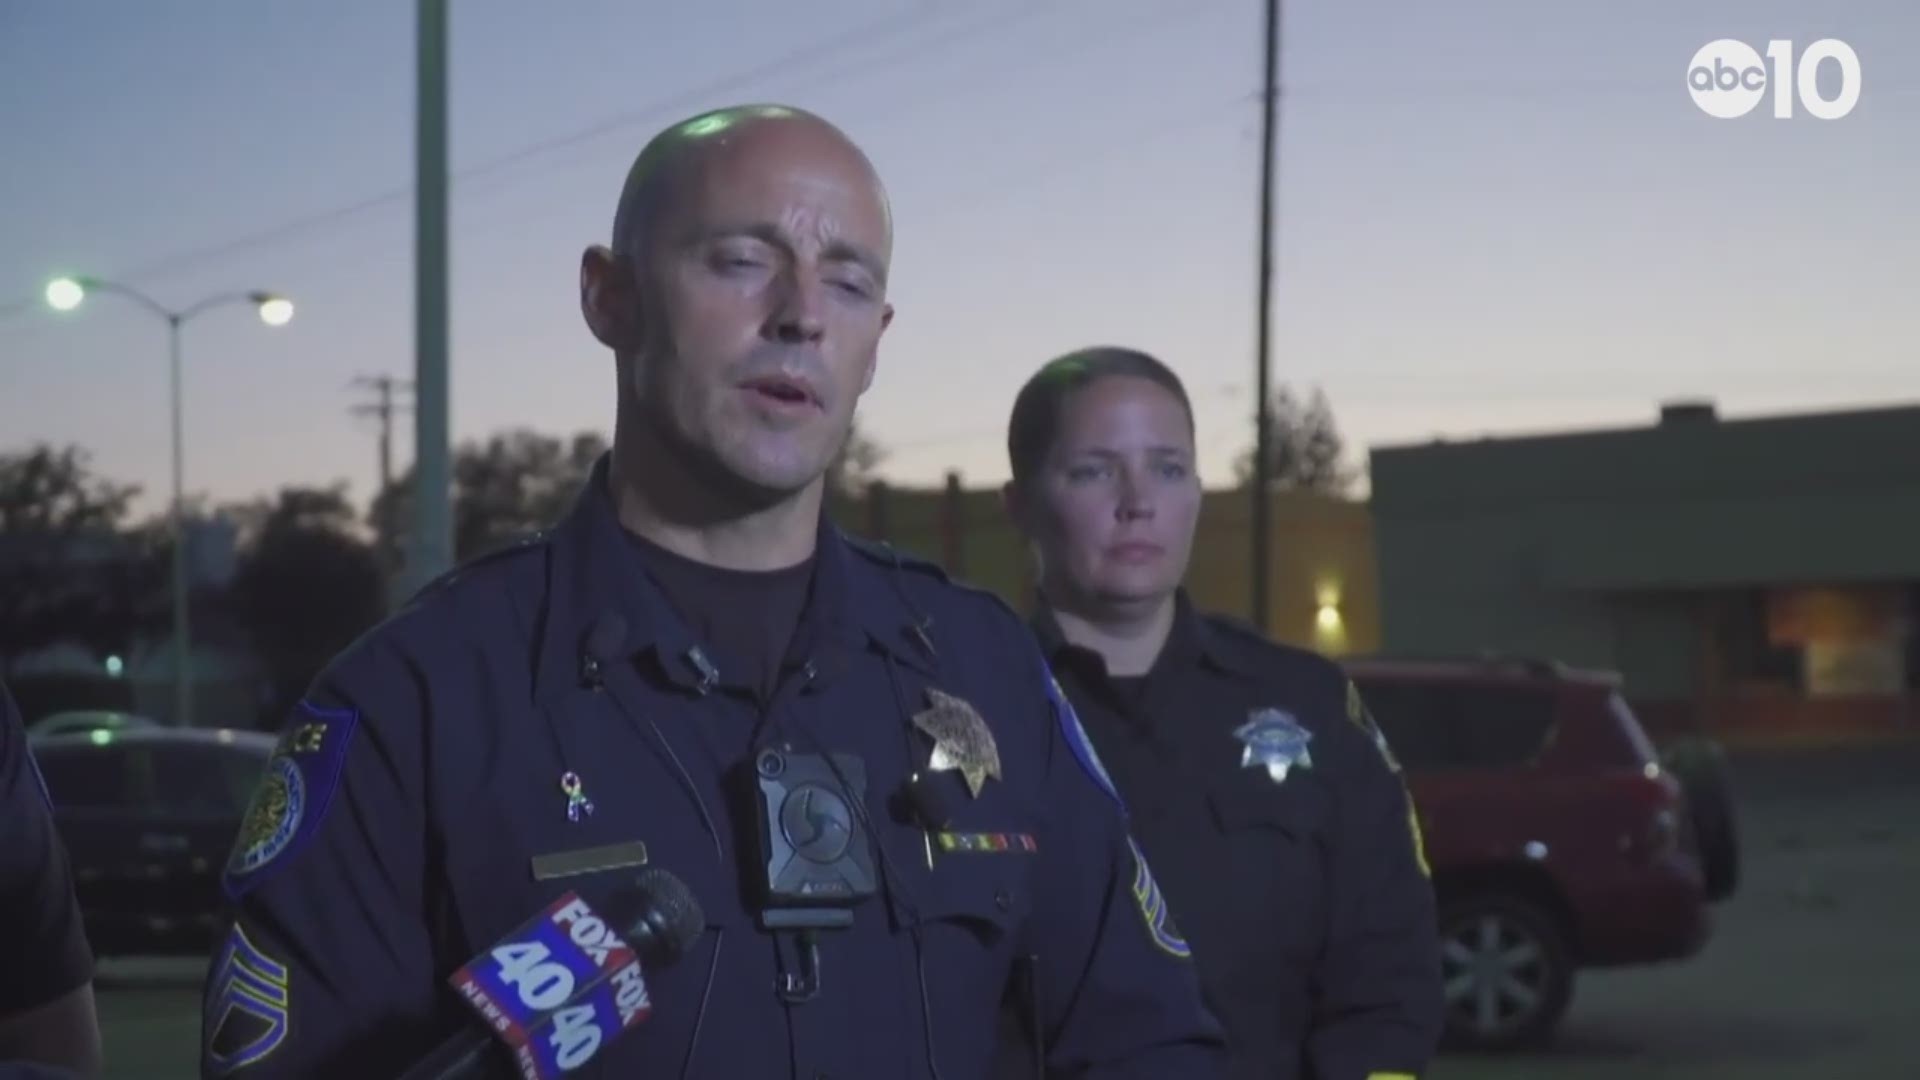 A Sacramento police officer was shot in north Sacramento Wednesday evening. Sgt. Vance Chandler is taking questions.  The officer is hospitalized in serious condition, Chandler said.